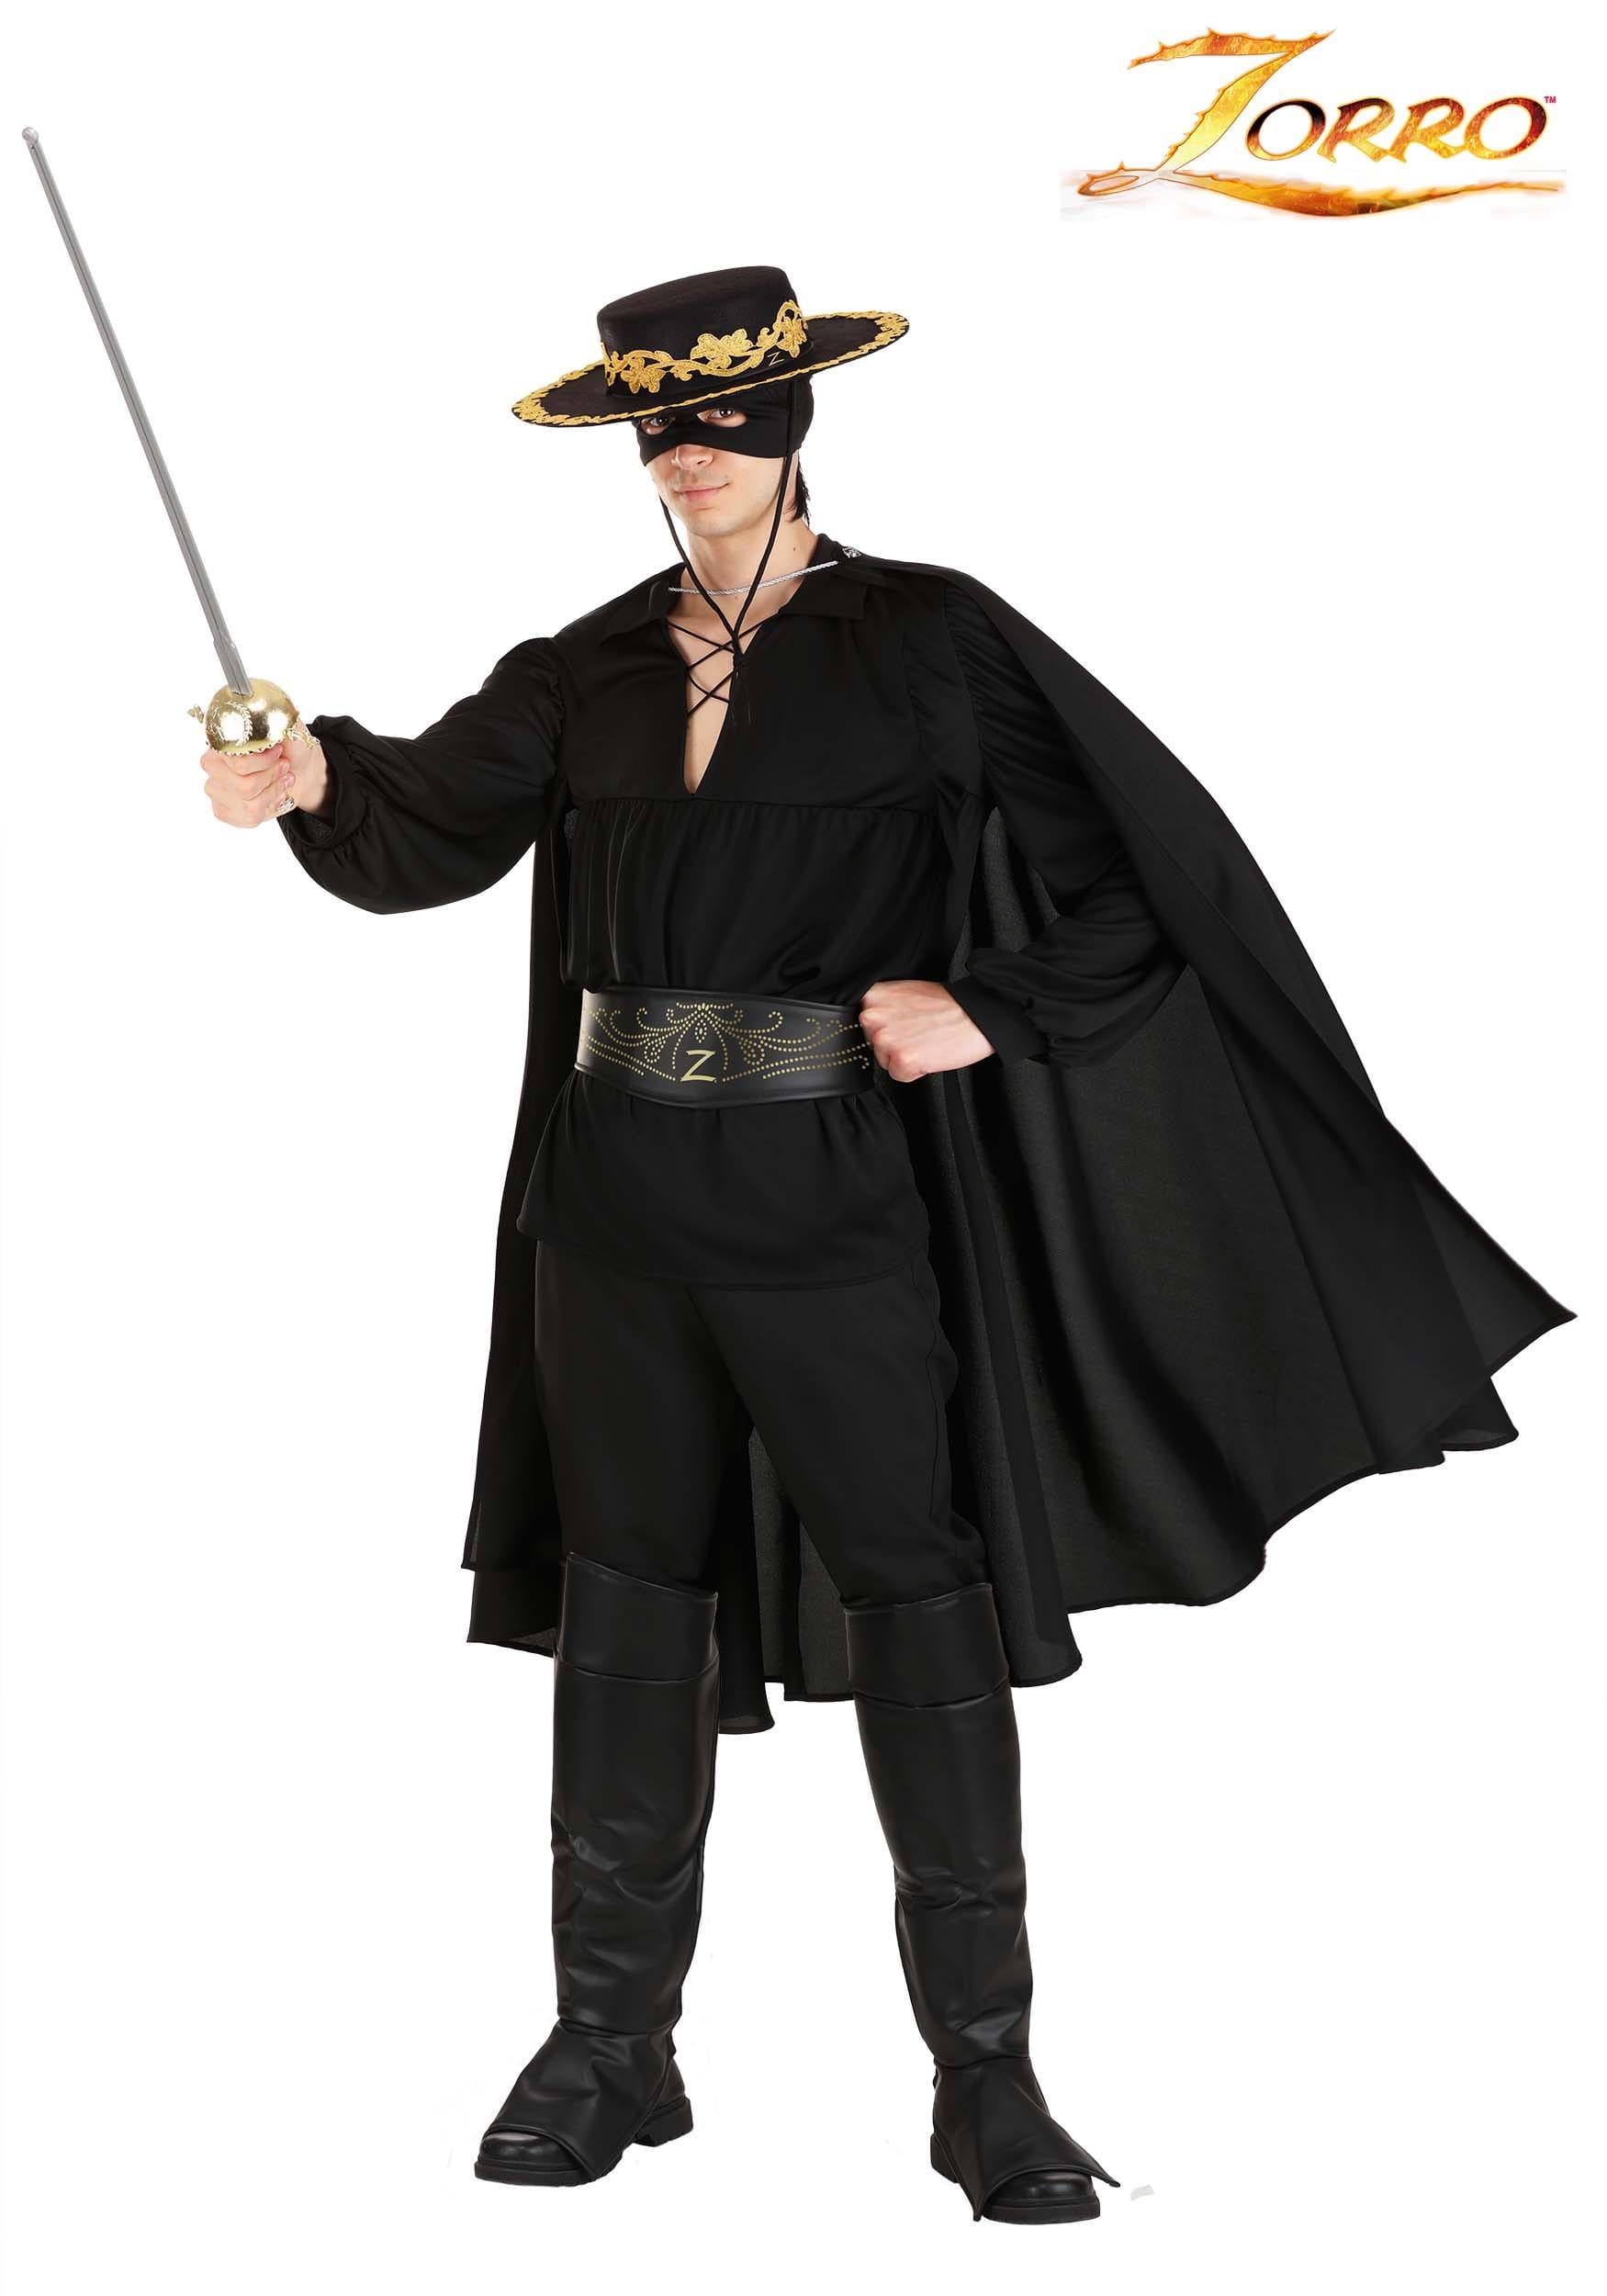 https://images.halloweencostumes.com/products/76613/1-1/adult-deluxe-zorro-costume.jpg